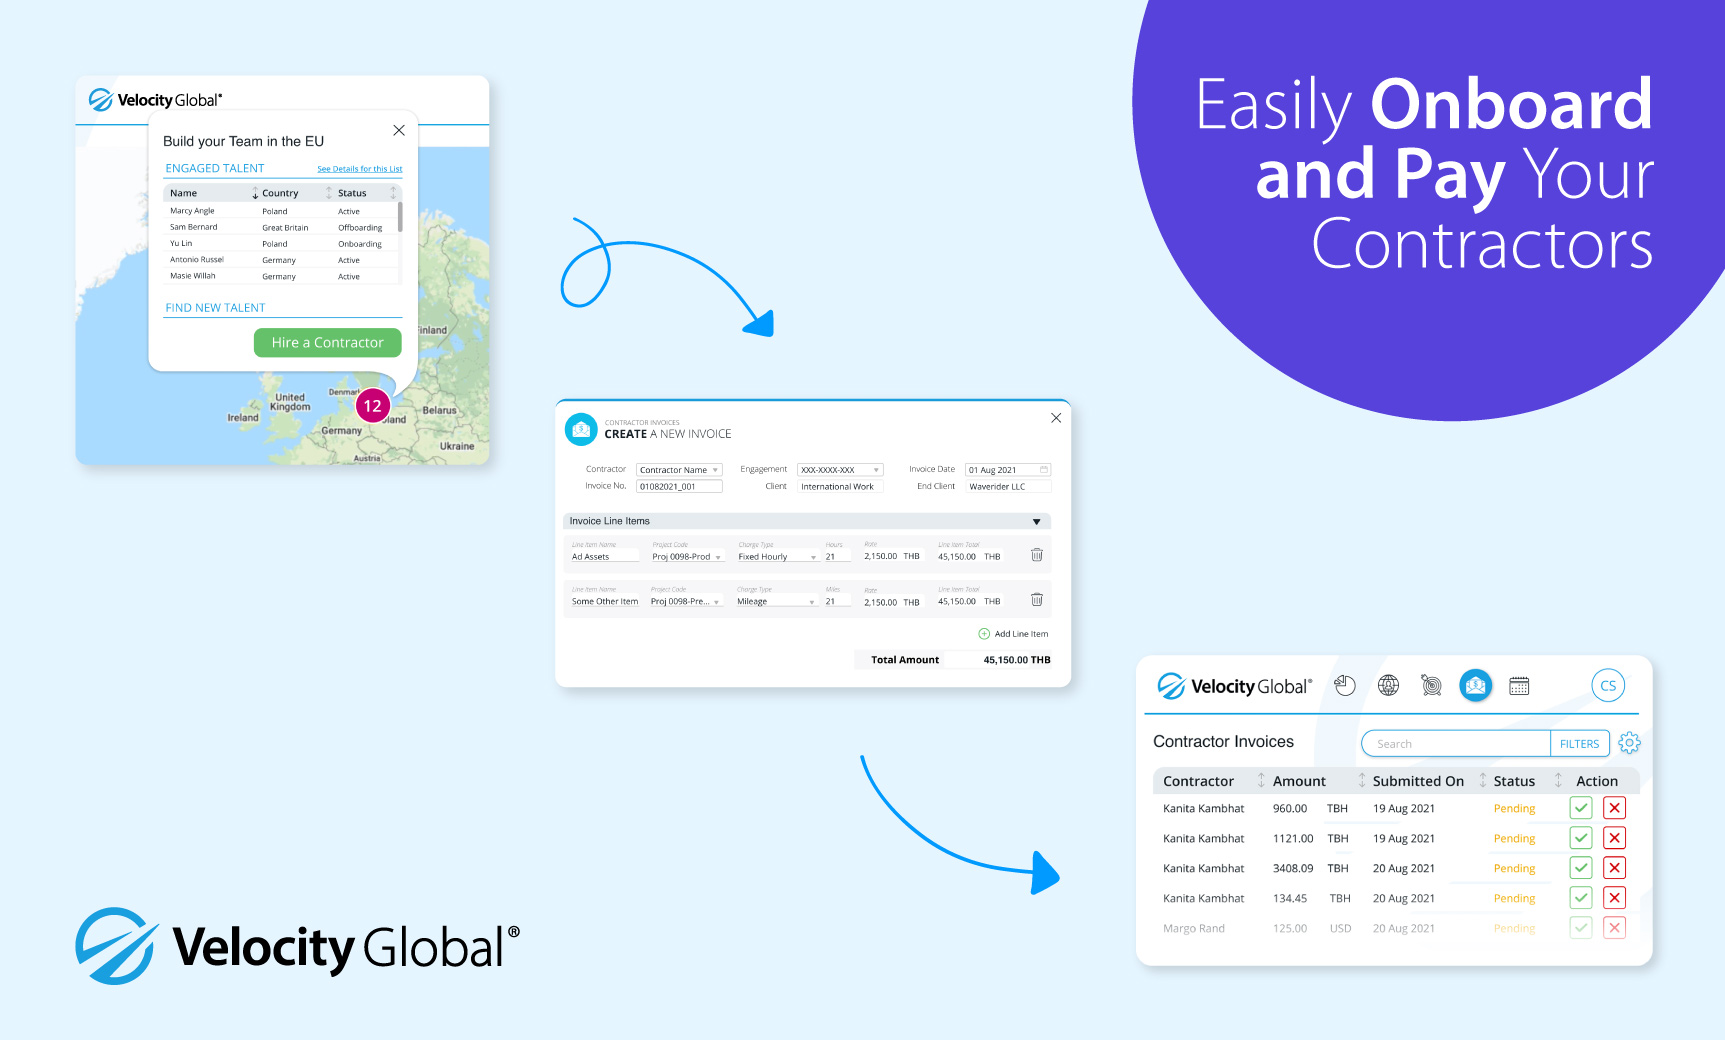 Velocity Global integrates Contractor Payments to its Global Work Platform